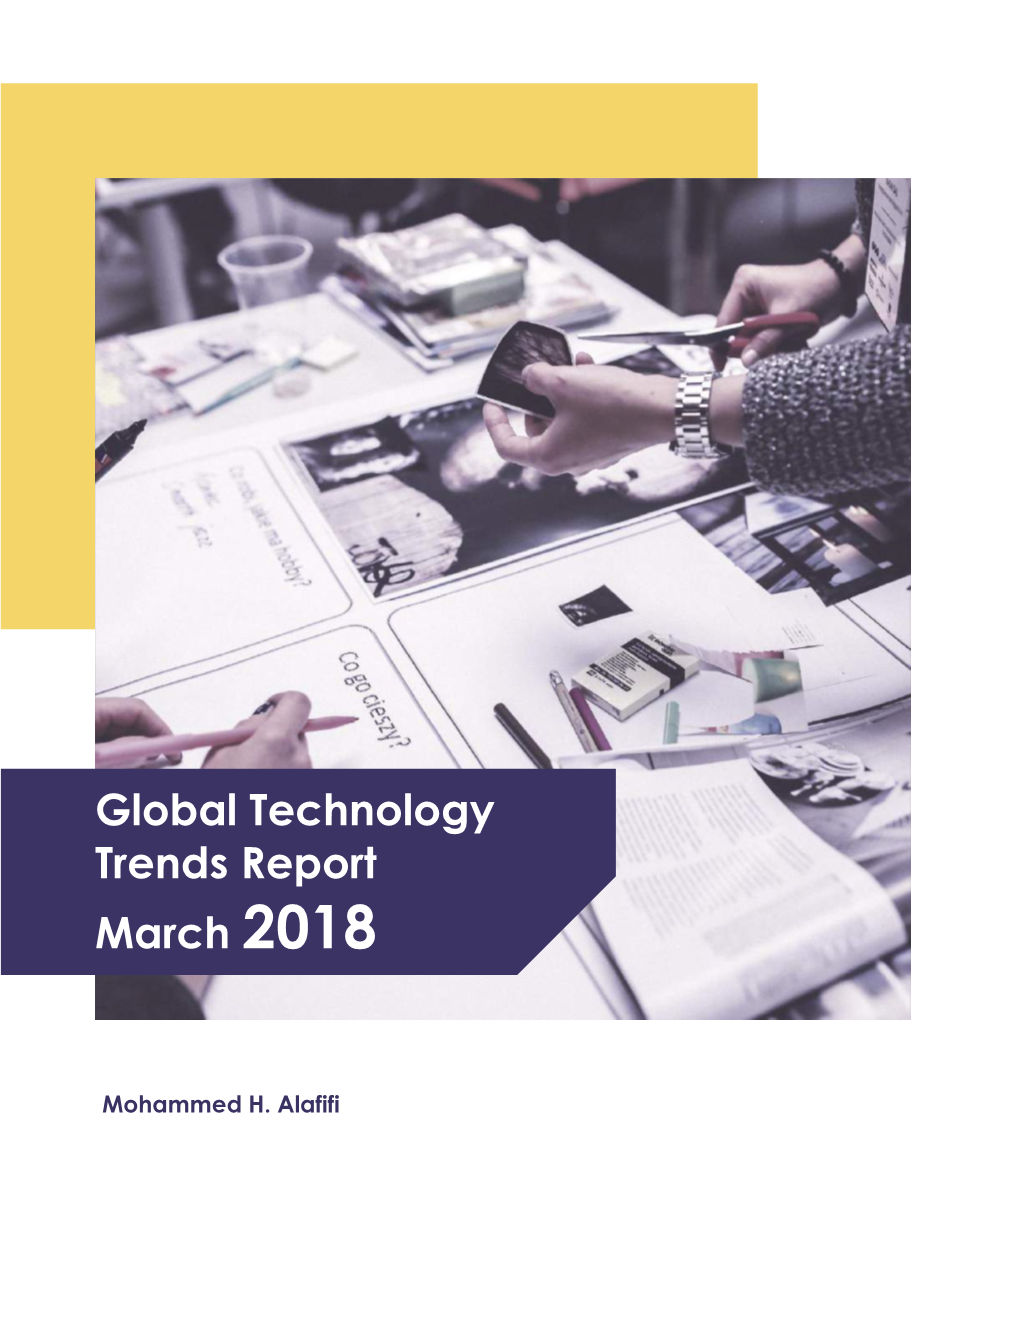 Global Technology Trends Report March 2018